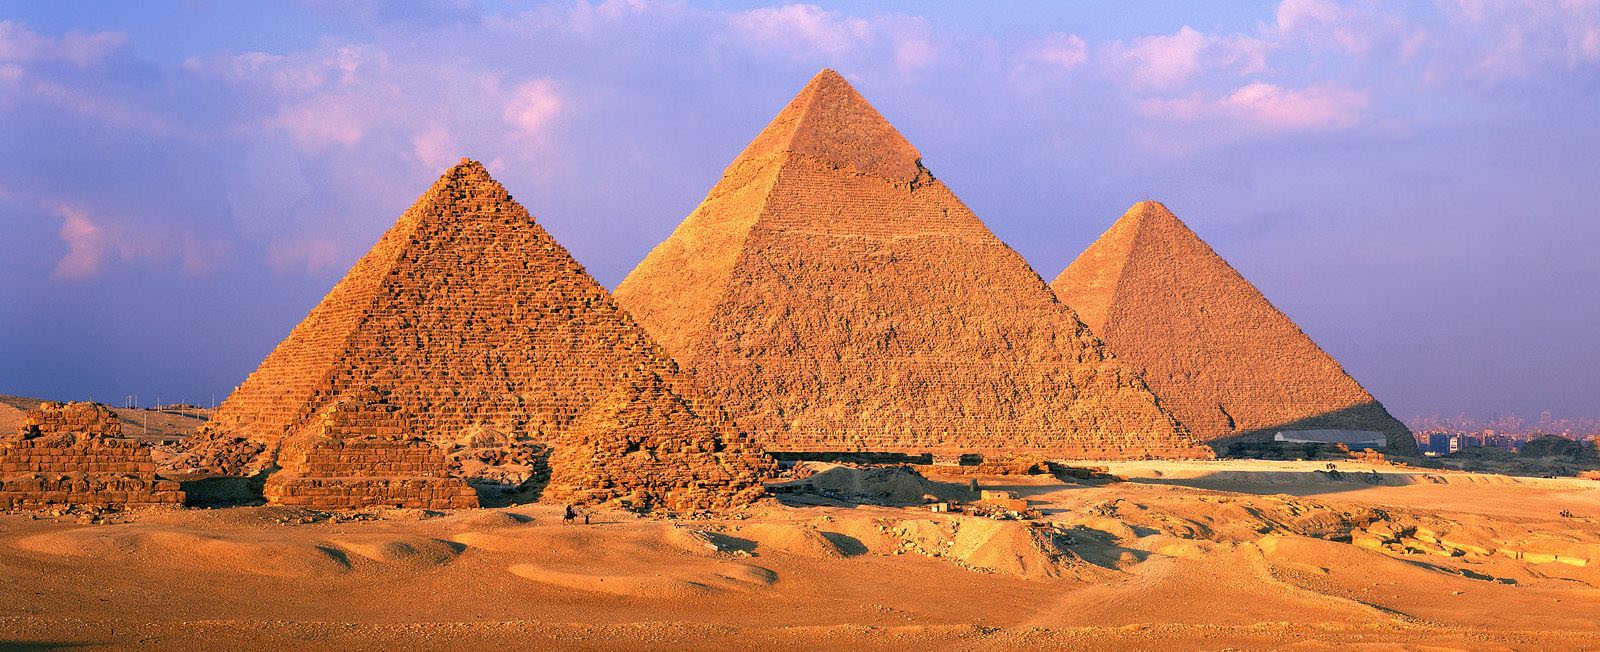 The great pyramid of Giza - Oldest And Largest Of The Three Pyramids In The Giza Necropolis